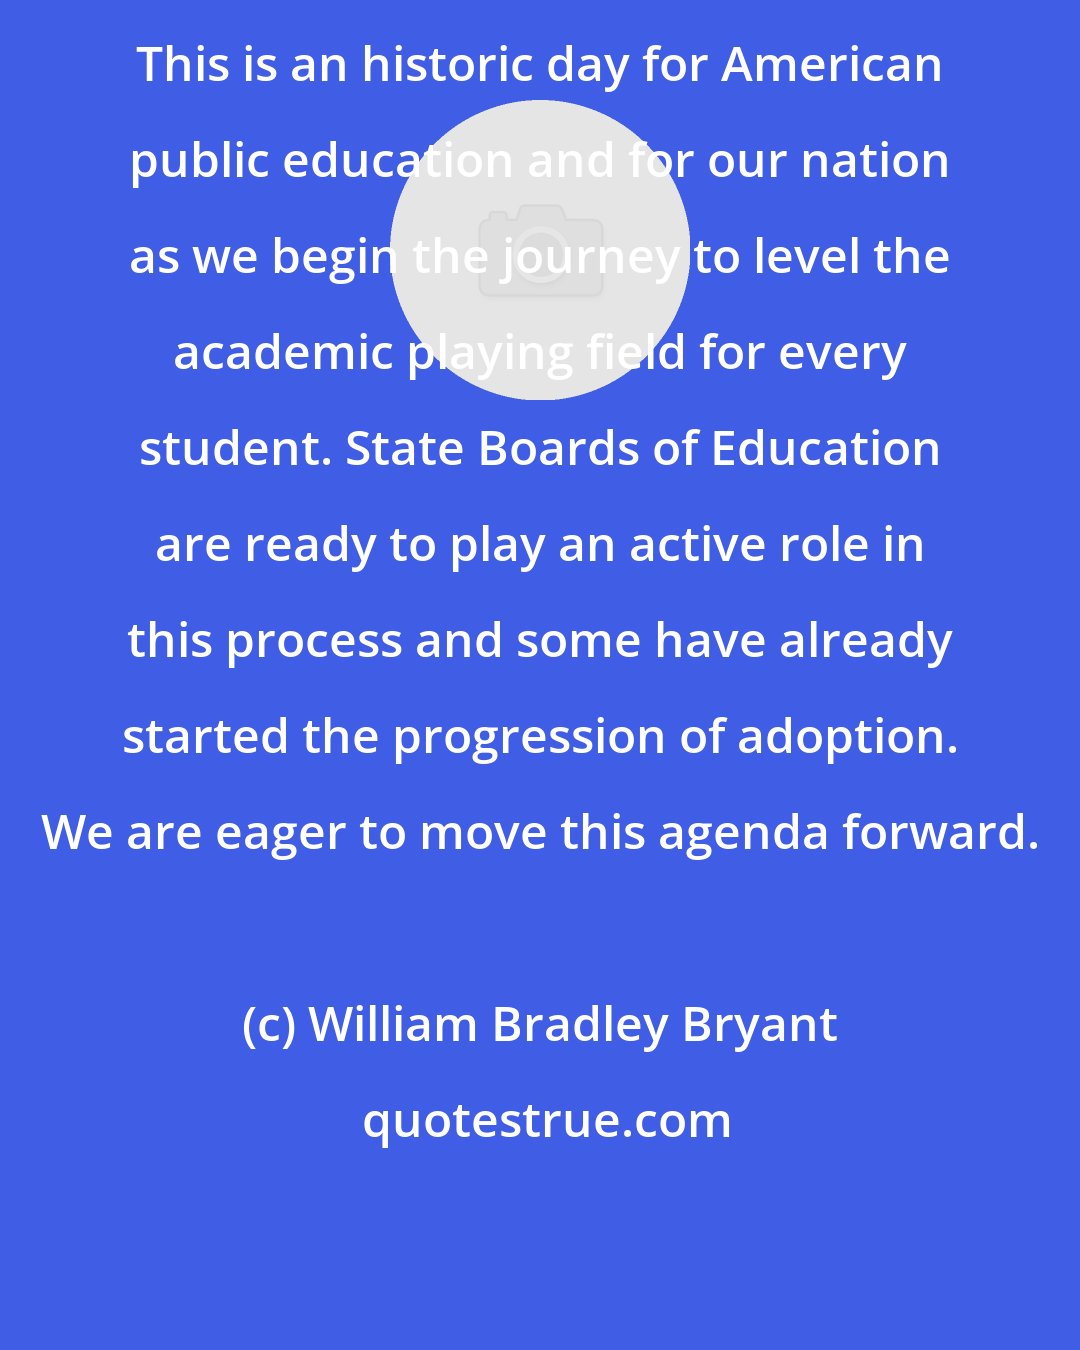 William Bradley Bryant: This is an historic day for American public education and for our nation as we begin the journey to level the academic playing field for every student. State Boards of Education are ready to play an active role in this process and some have already started the progression of adoption. We are eager to move this agenda forward.